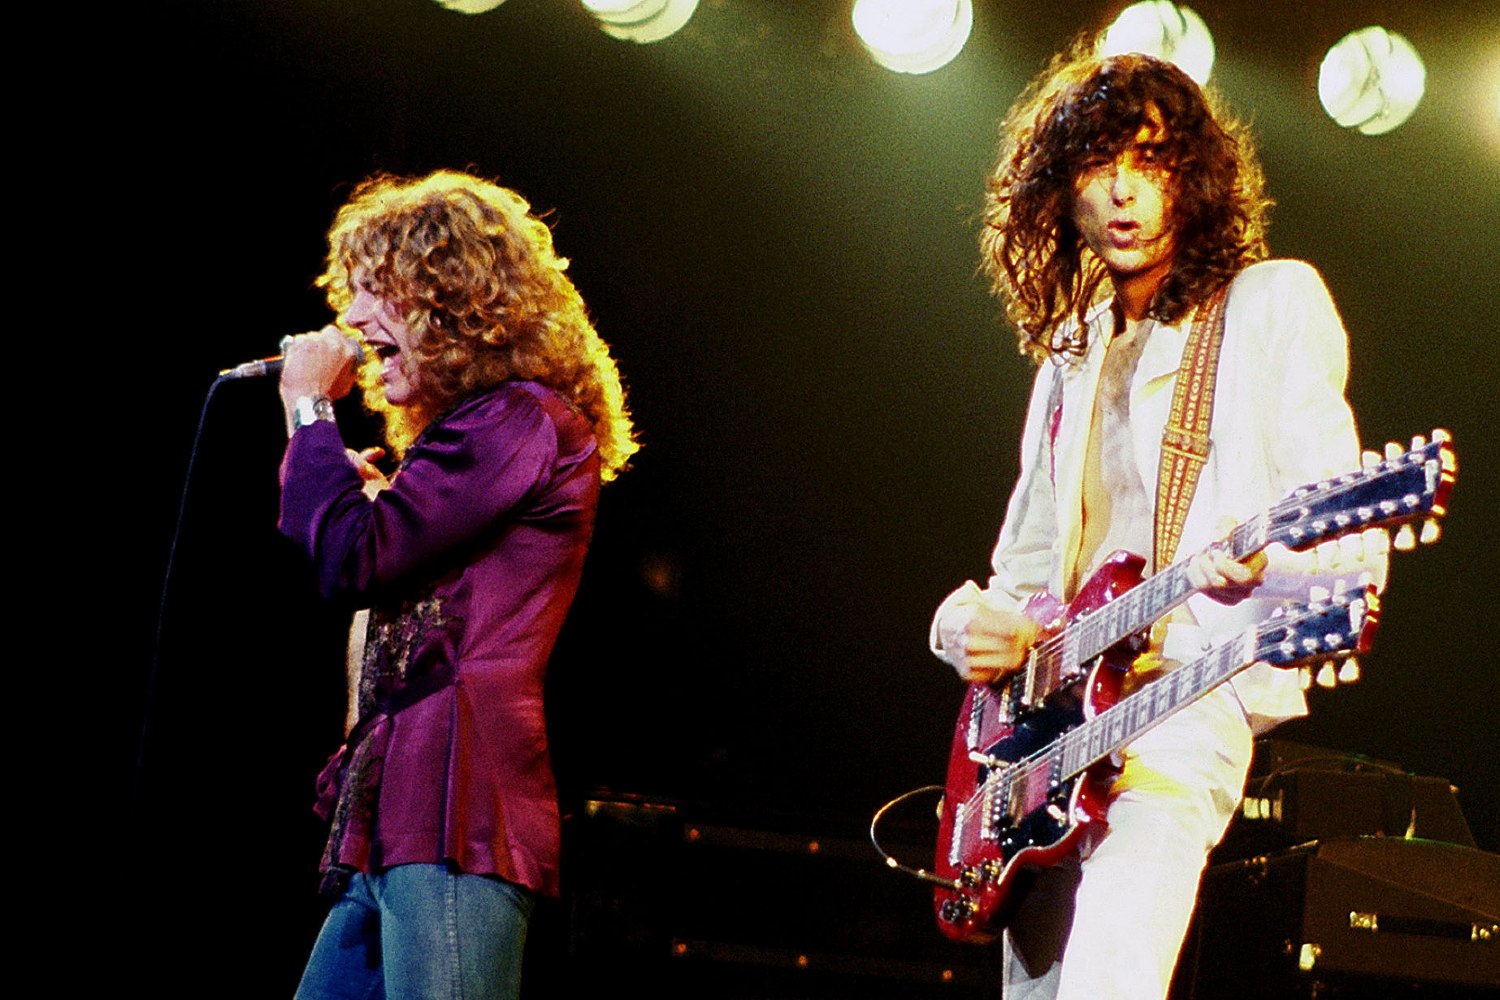 Led Zeppelin - Robert Plant - Jimmy Page - 1977